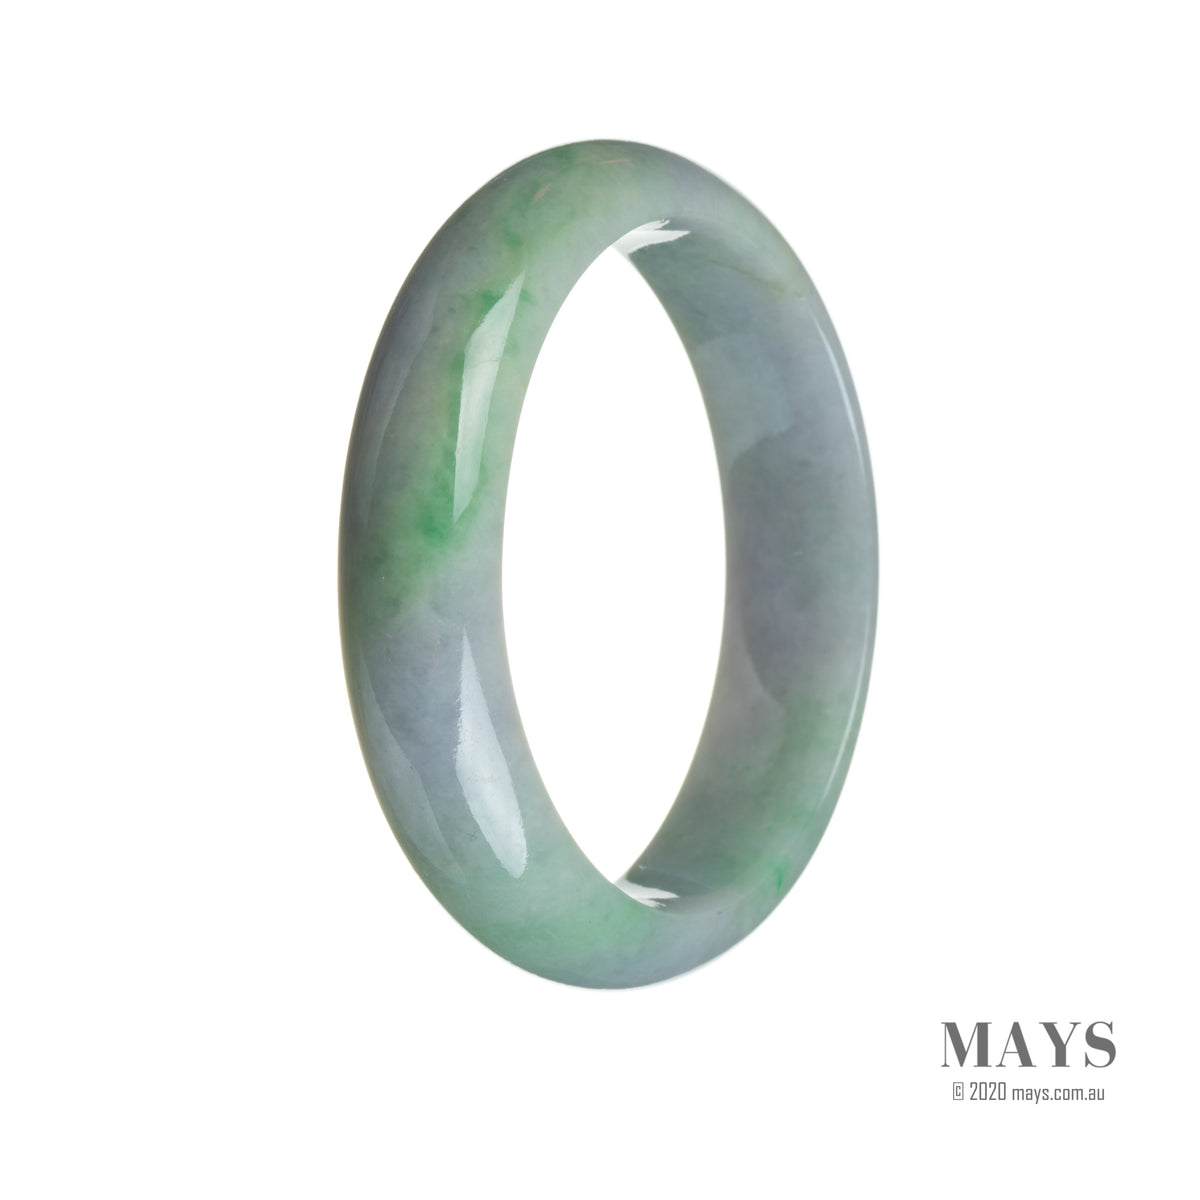 A half moon-shaped jade bangle bracelet with a bluish lavender and green color.